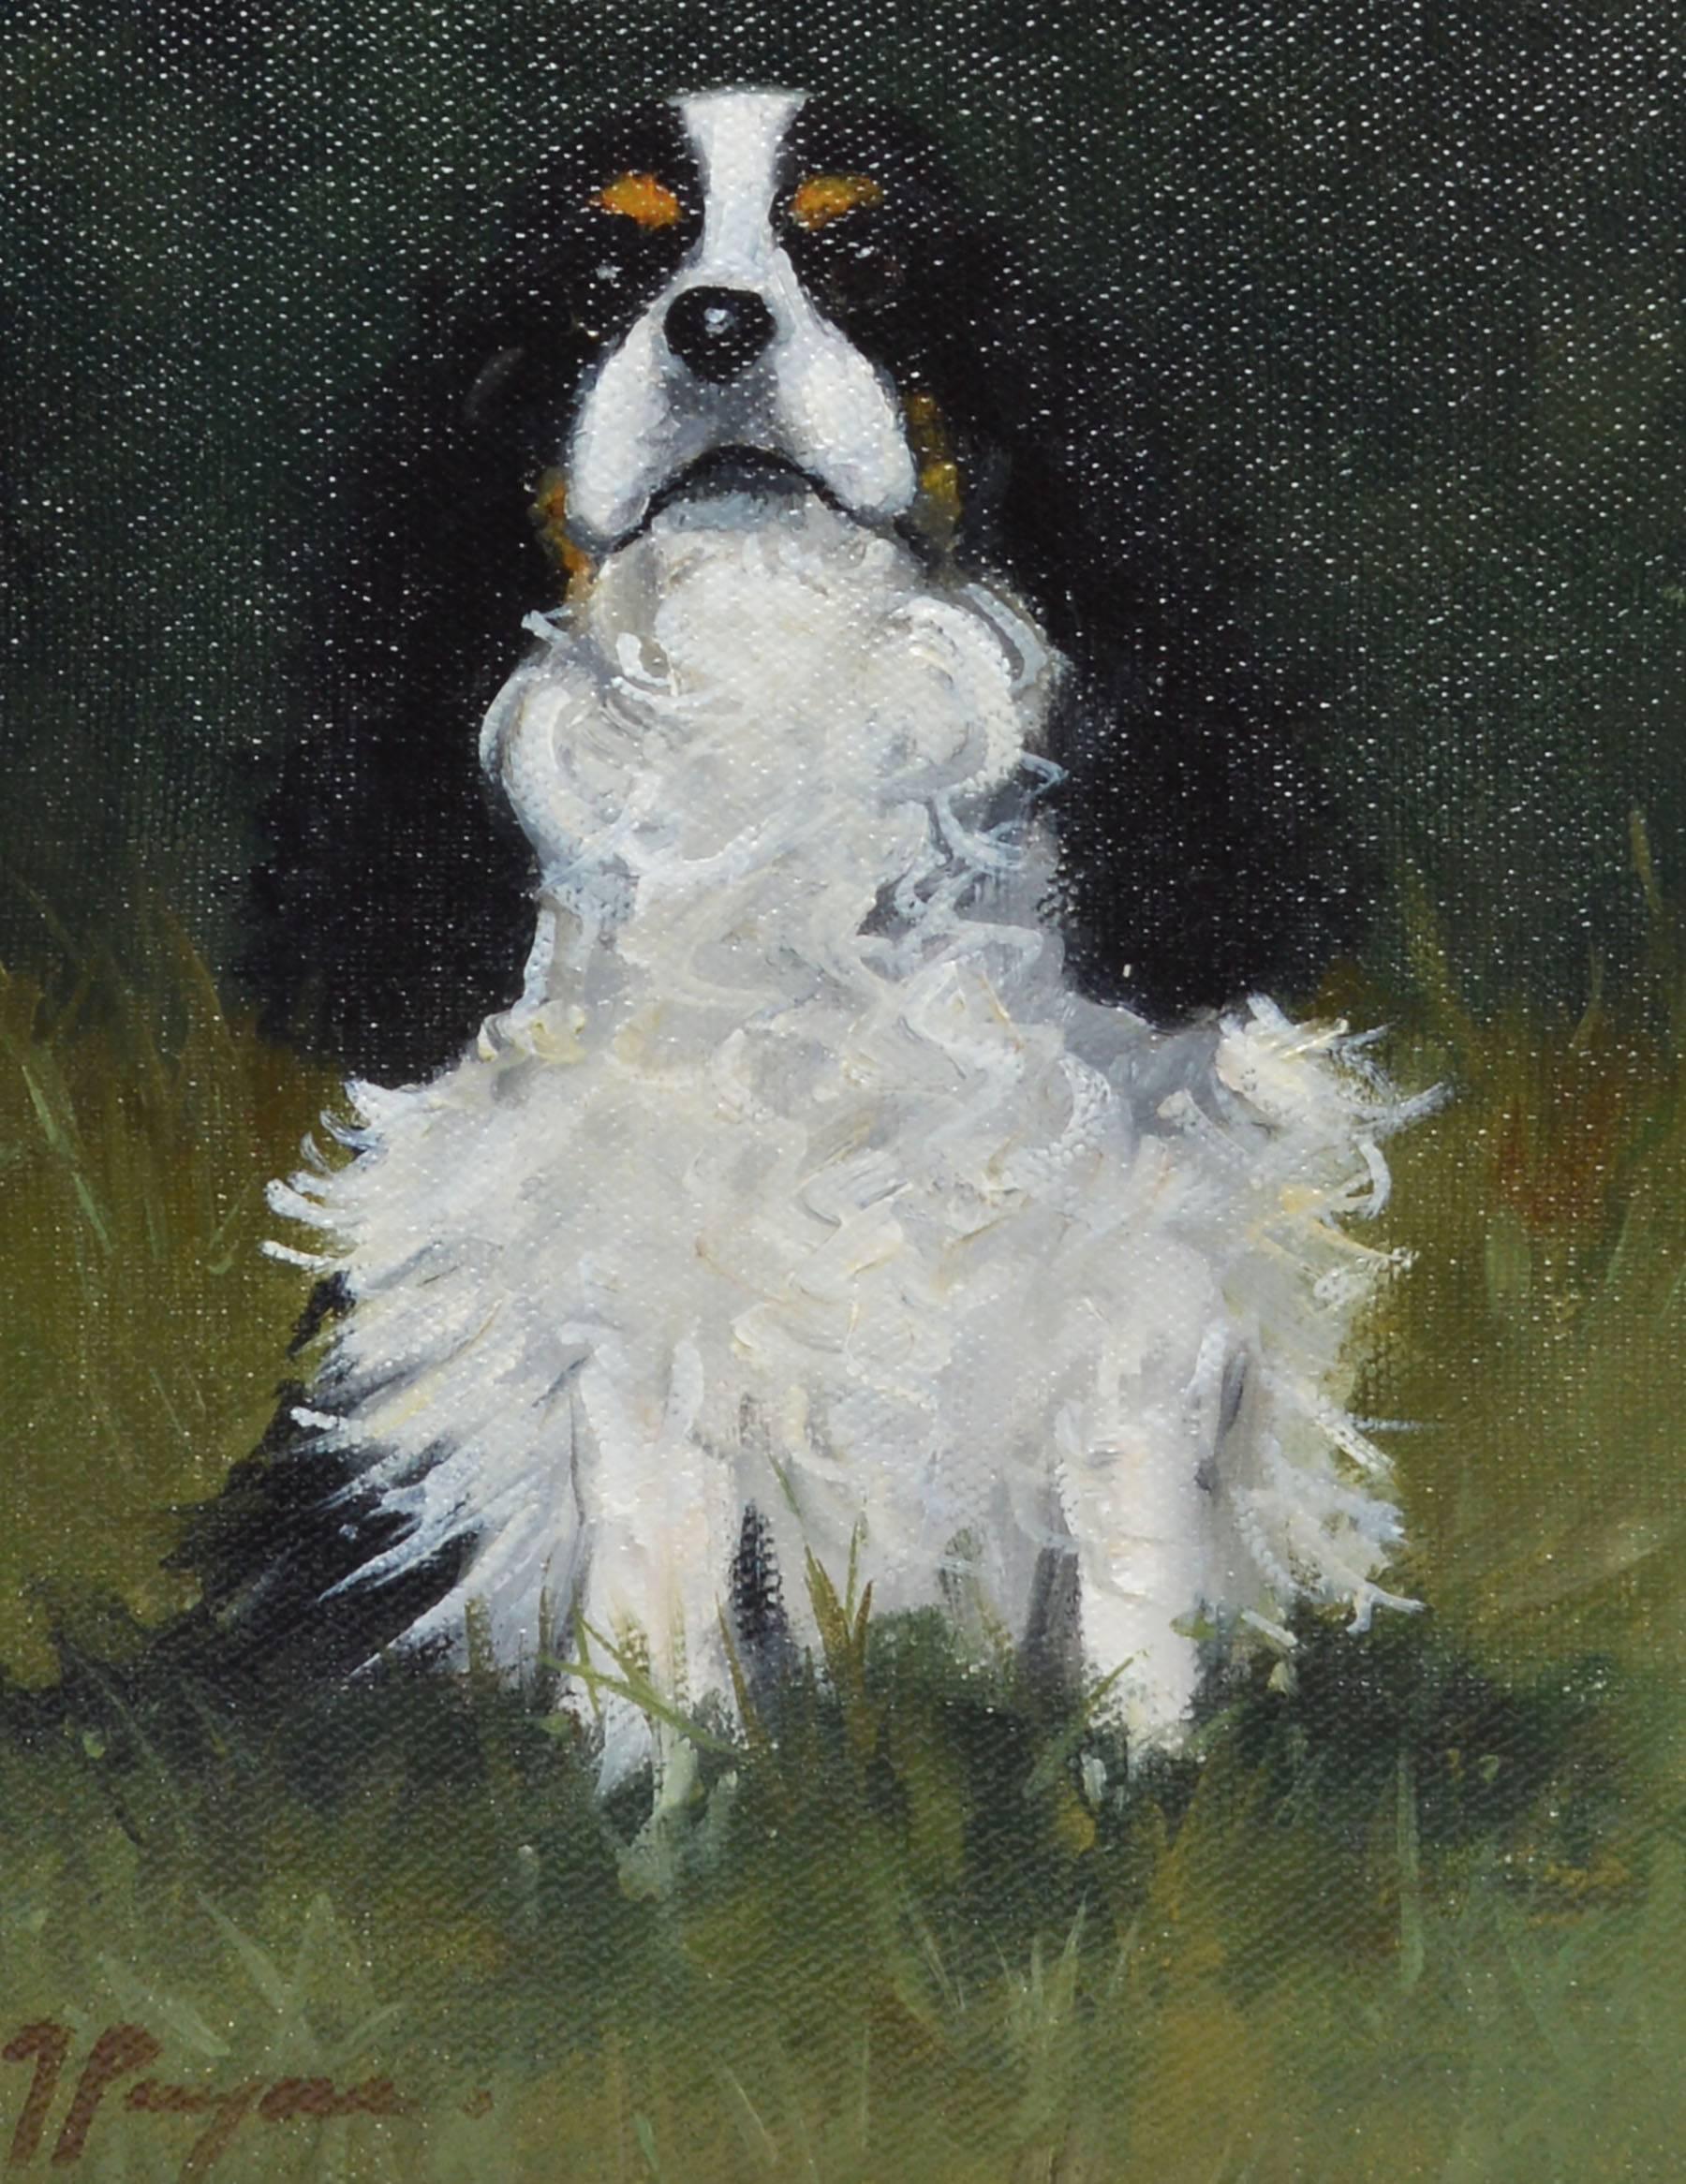 Impressionist portrait of a King Charles Cavalier Spaniel Dog.  Oil on board, circa 1970.  Signed illegibly.  Displayed in a giltwood frame.  Image size, 7